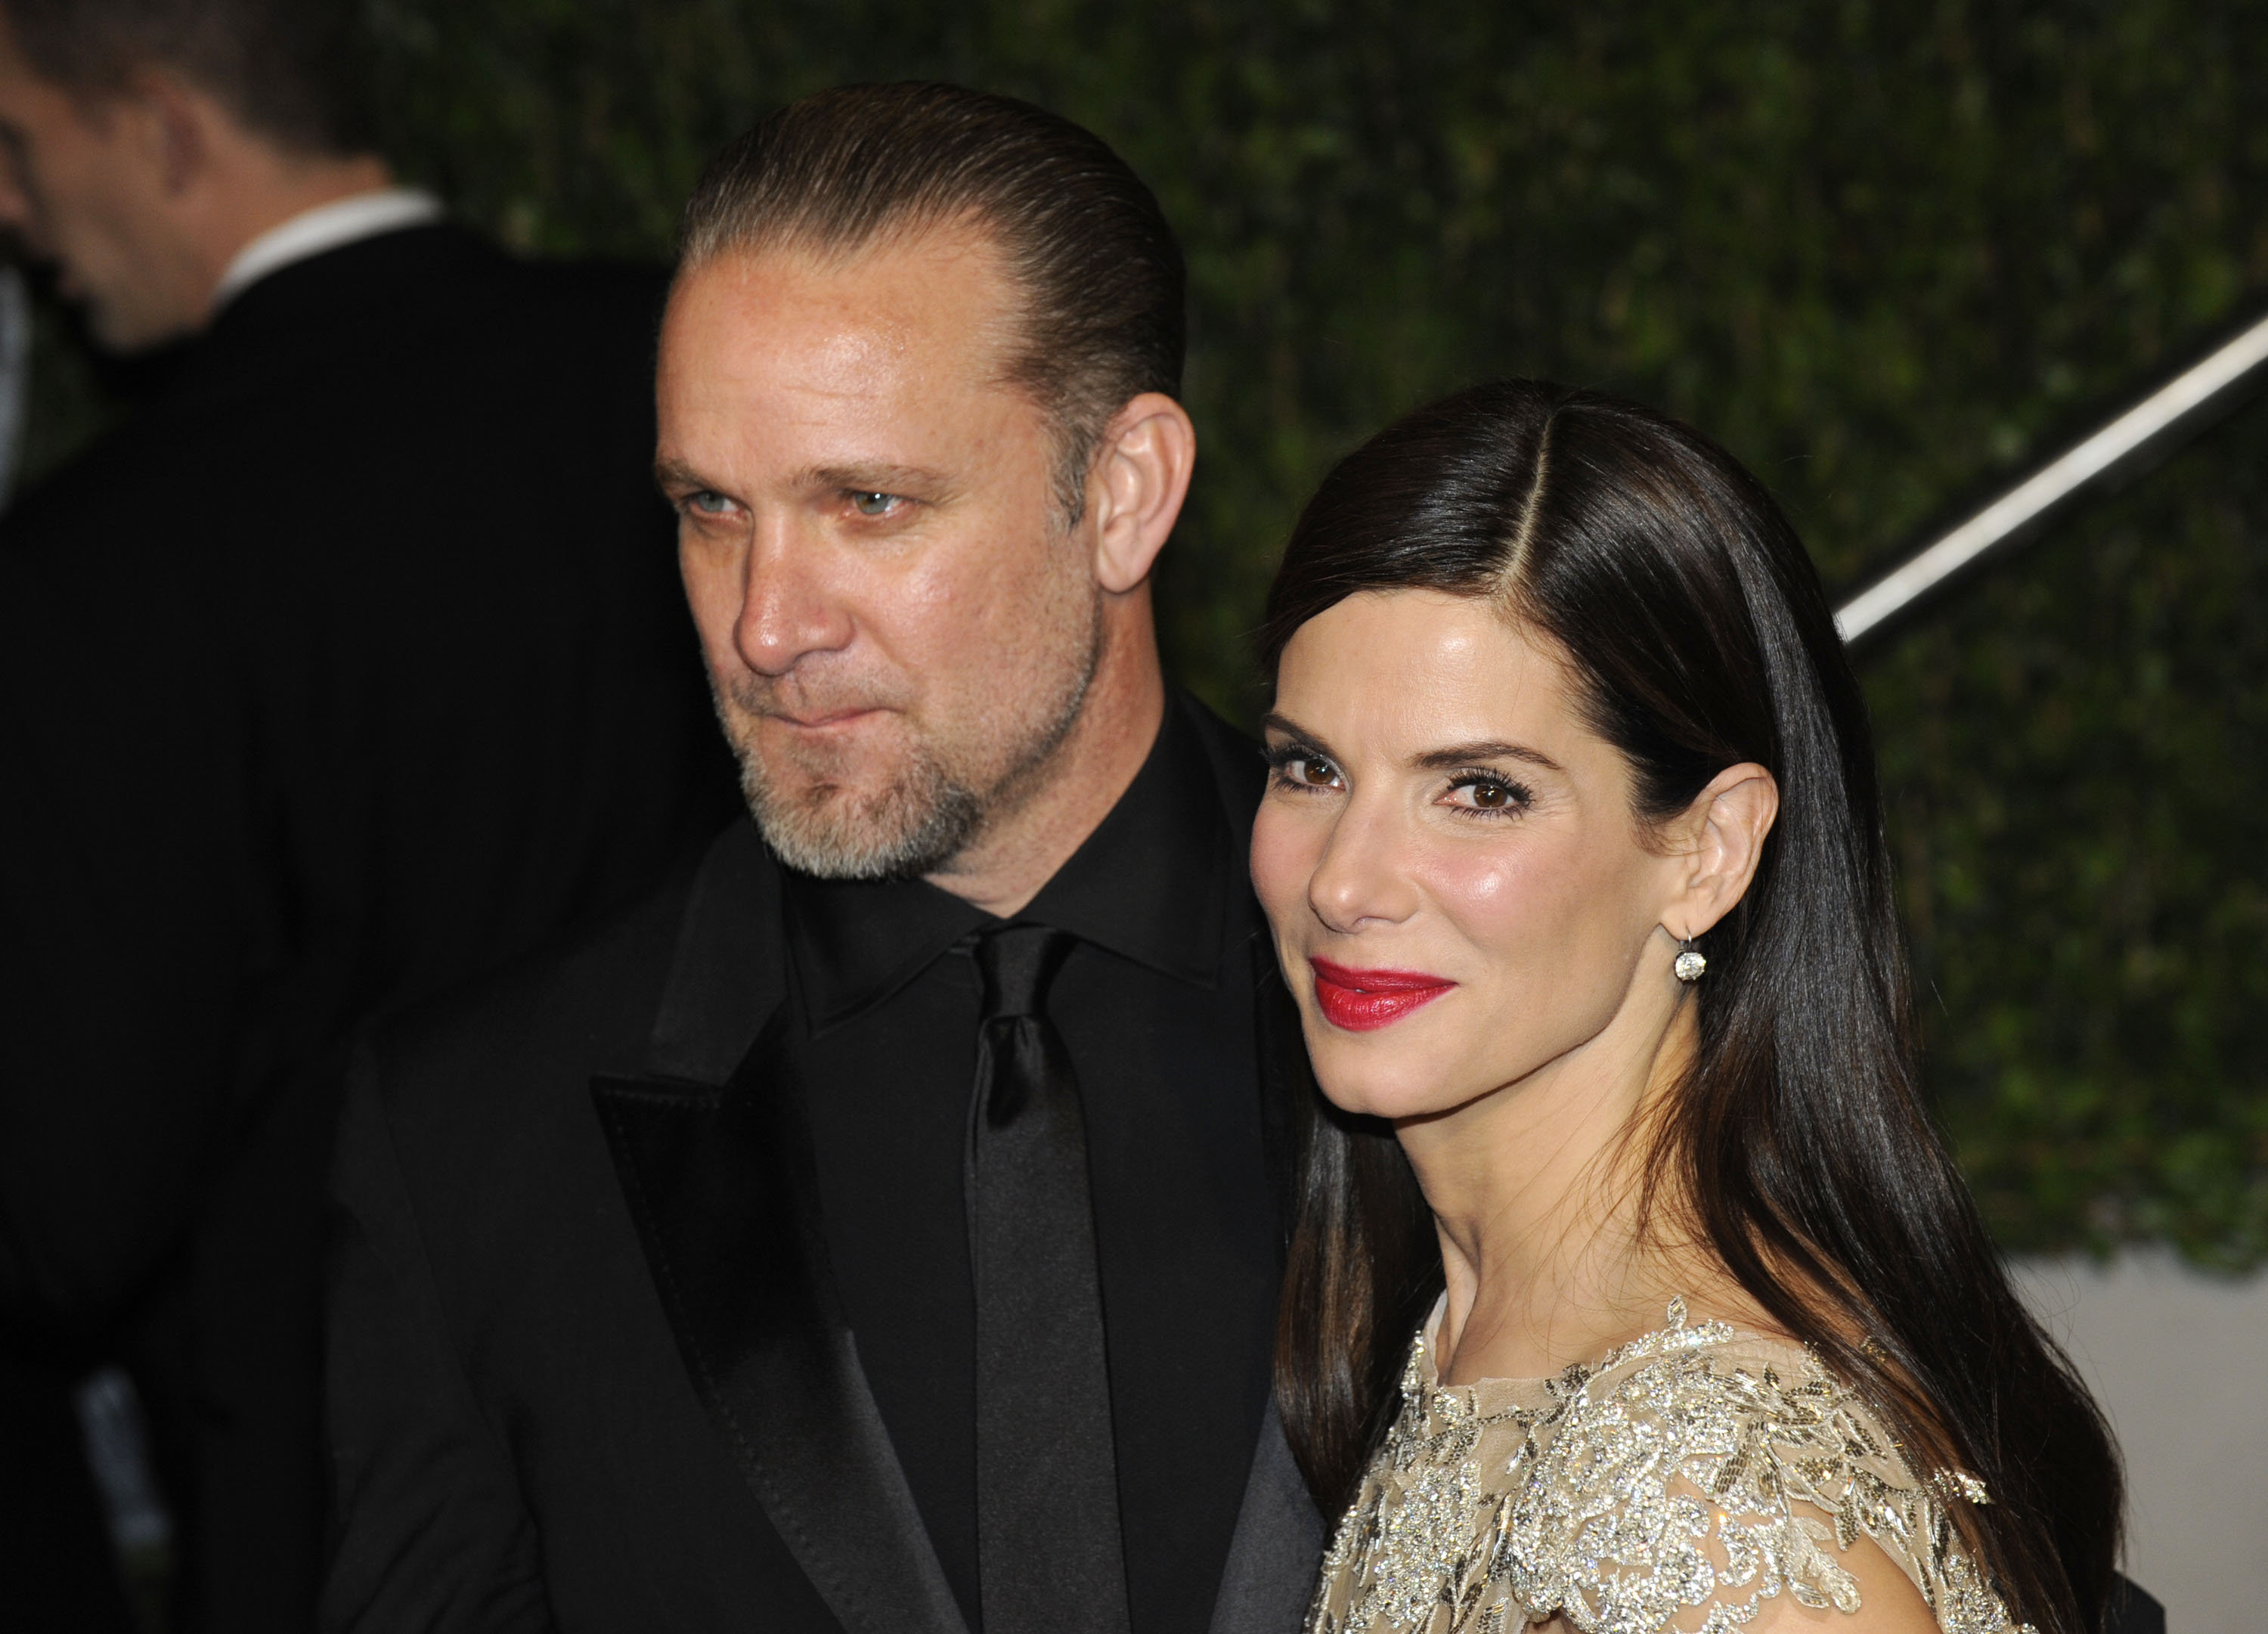 Jesse James and Sandra Bullock at the Vanity Fair Oscar Party in West Hollywood, California on March 7, 2010 | Source: Getty Images